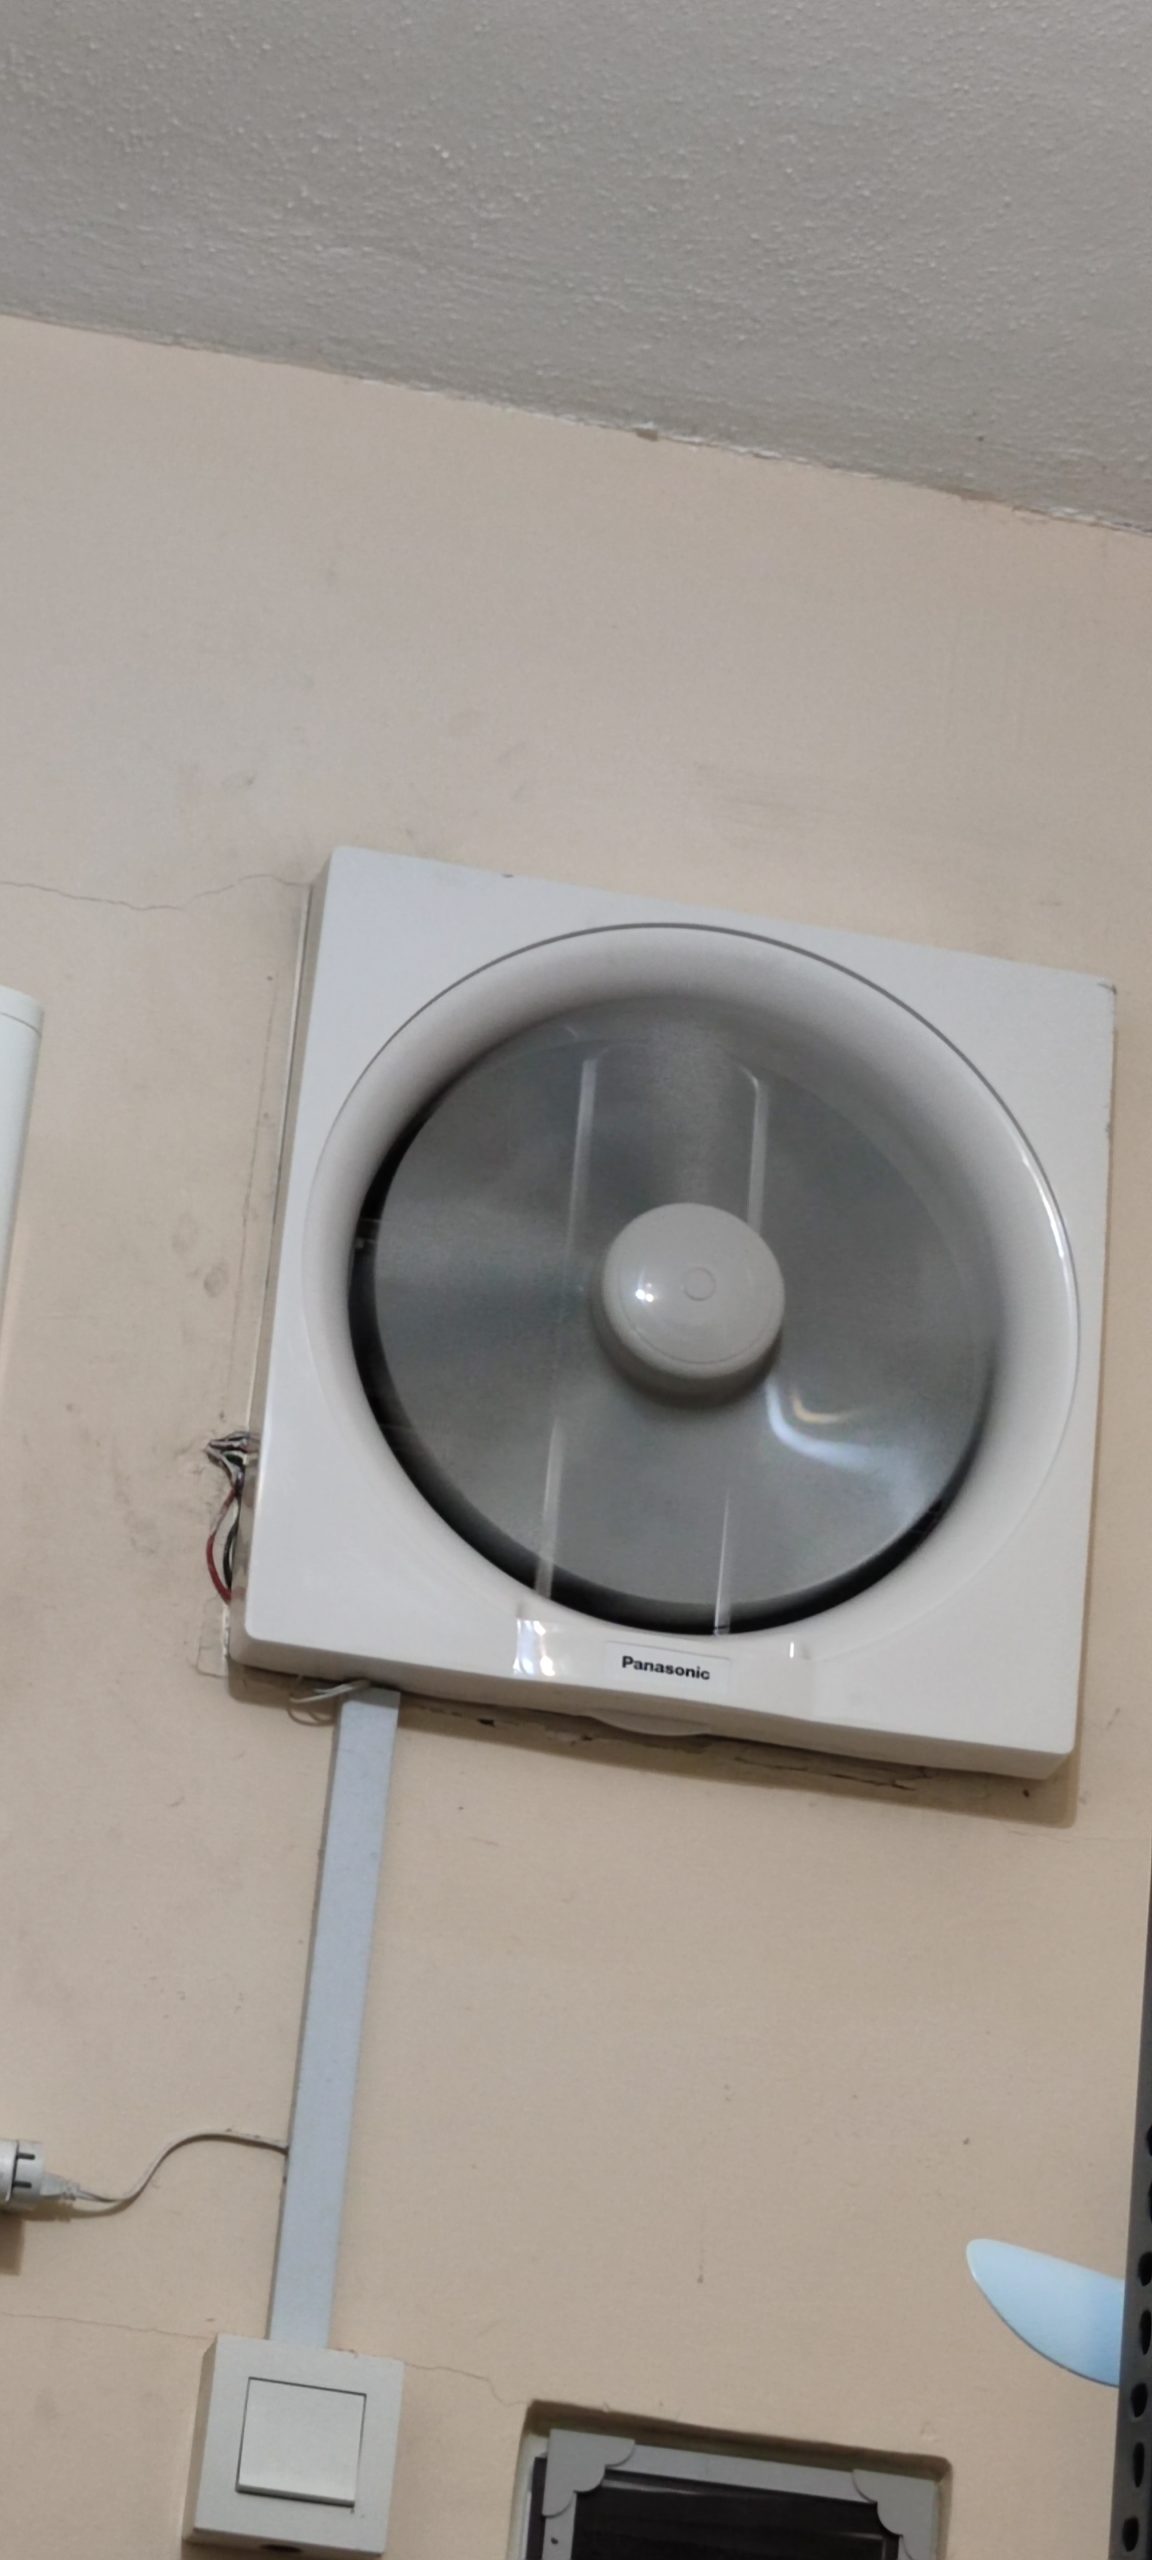 Replaced Exhaust Fan | From David Chong's Journal